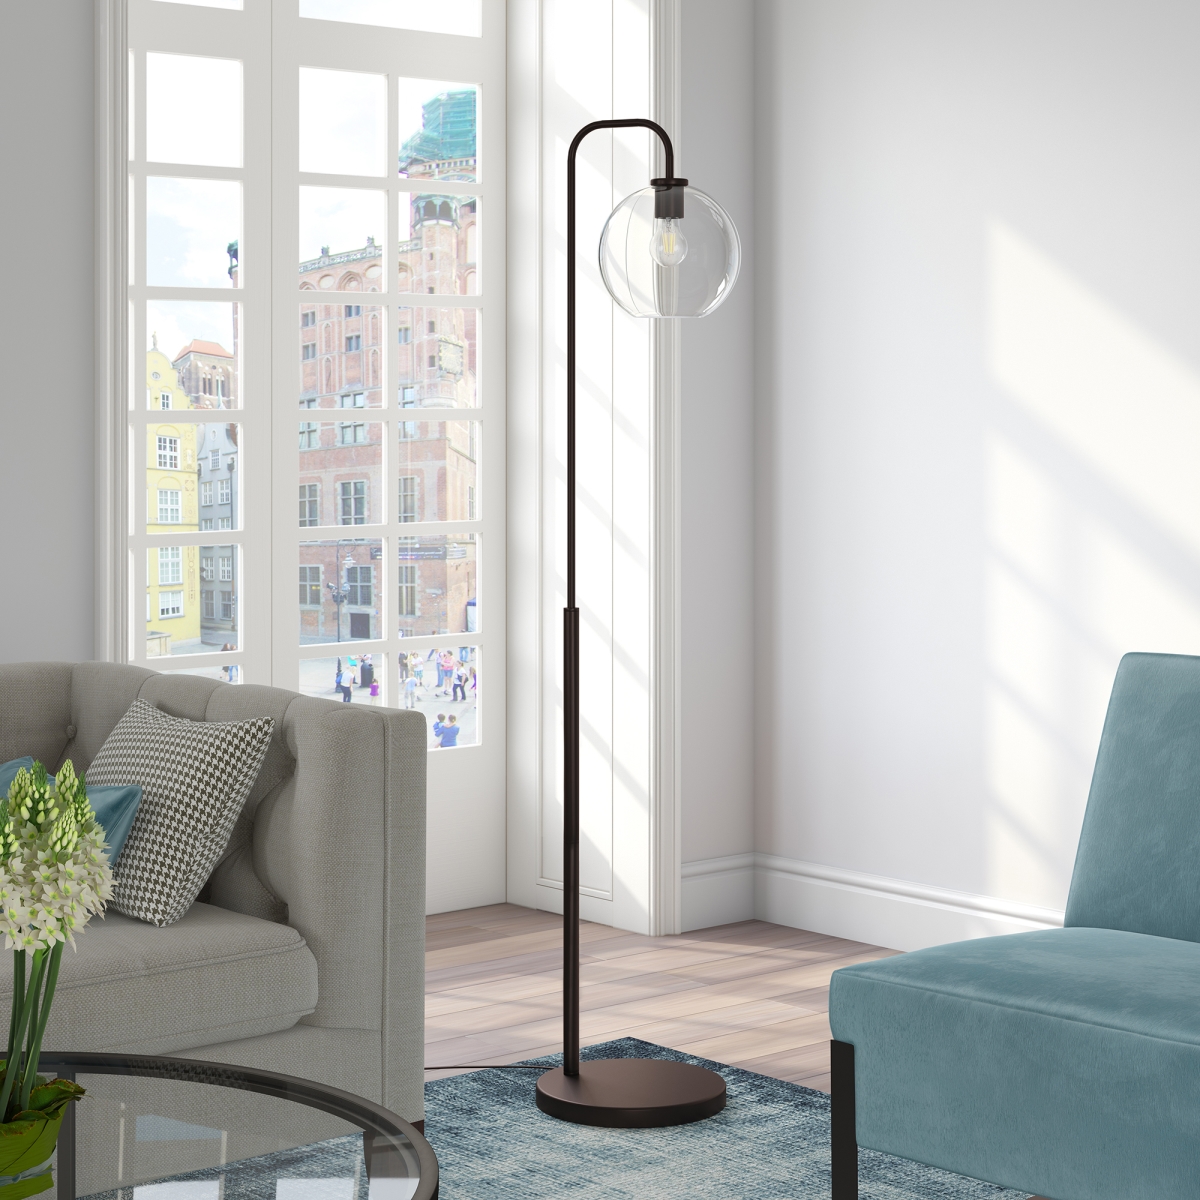 Picture of Henn & Hart FL0293 Harrison Blackened Bronze Arc Floor Lamp with Clear Glass Shade